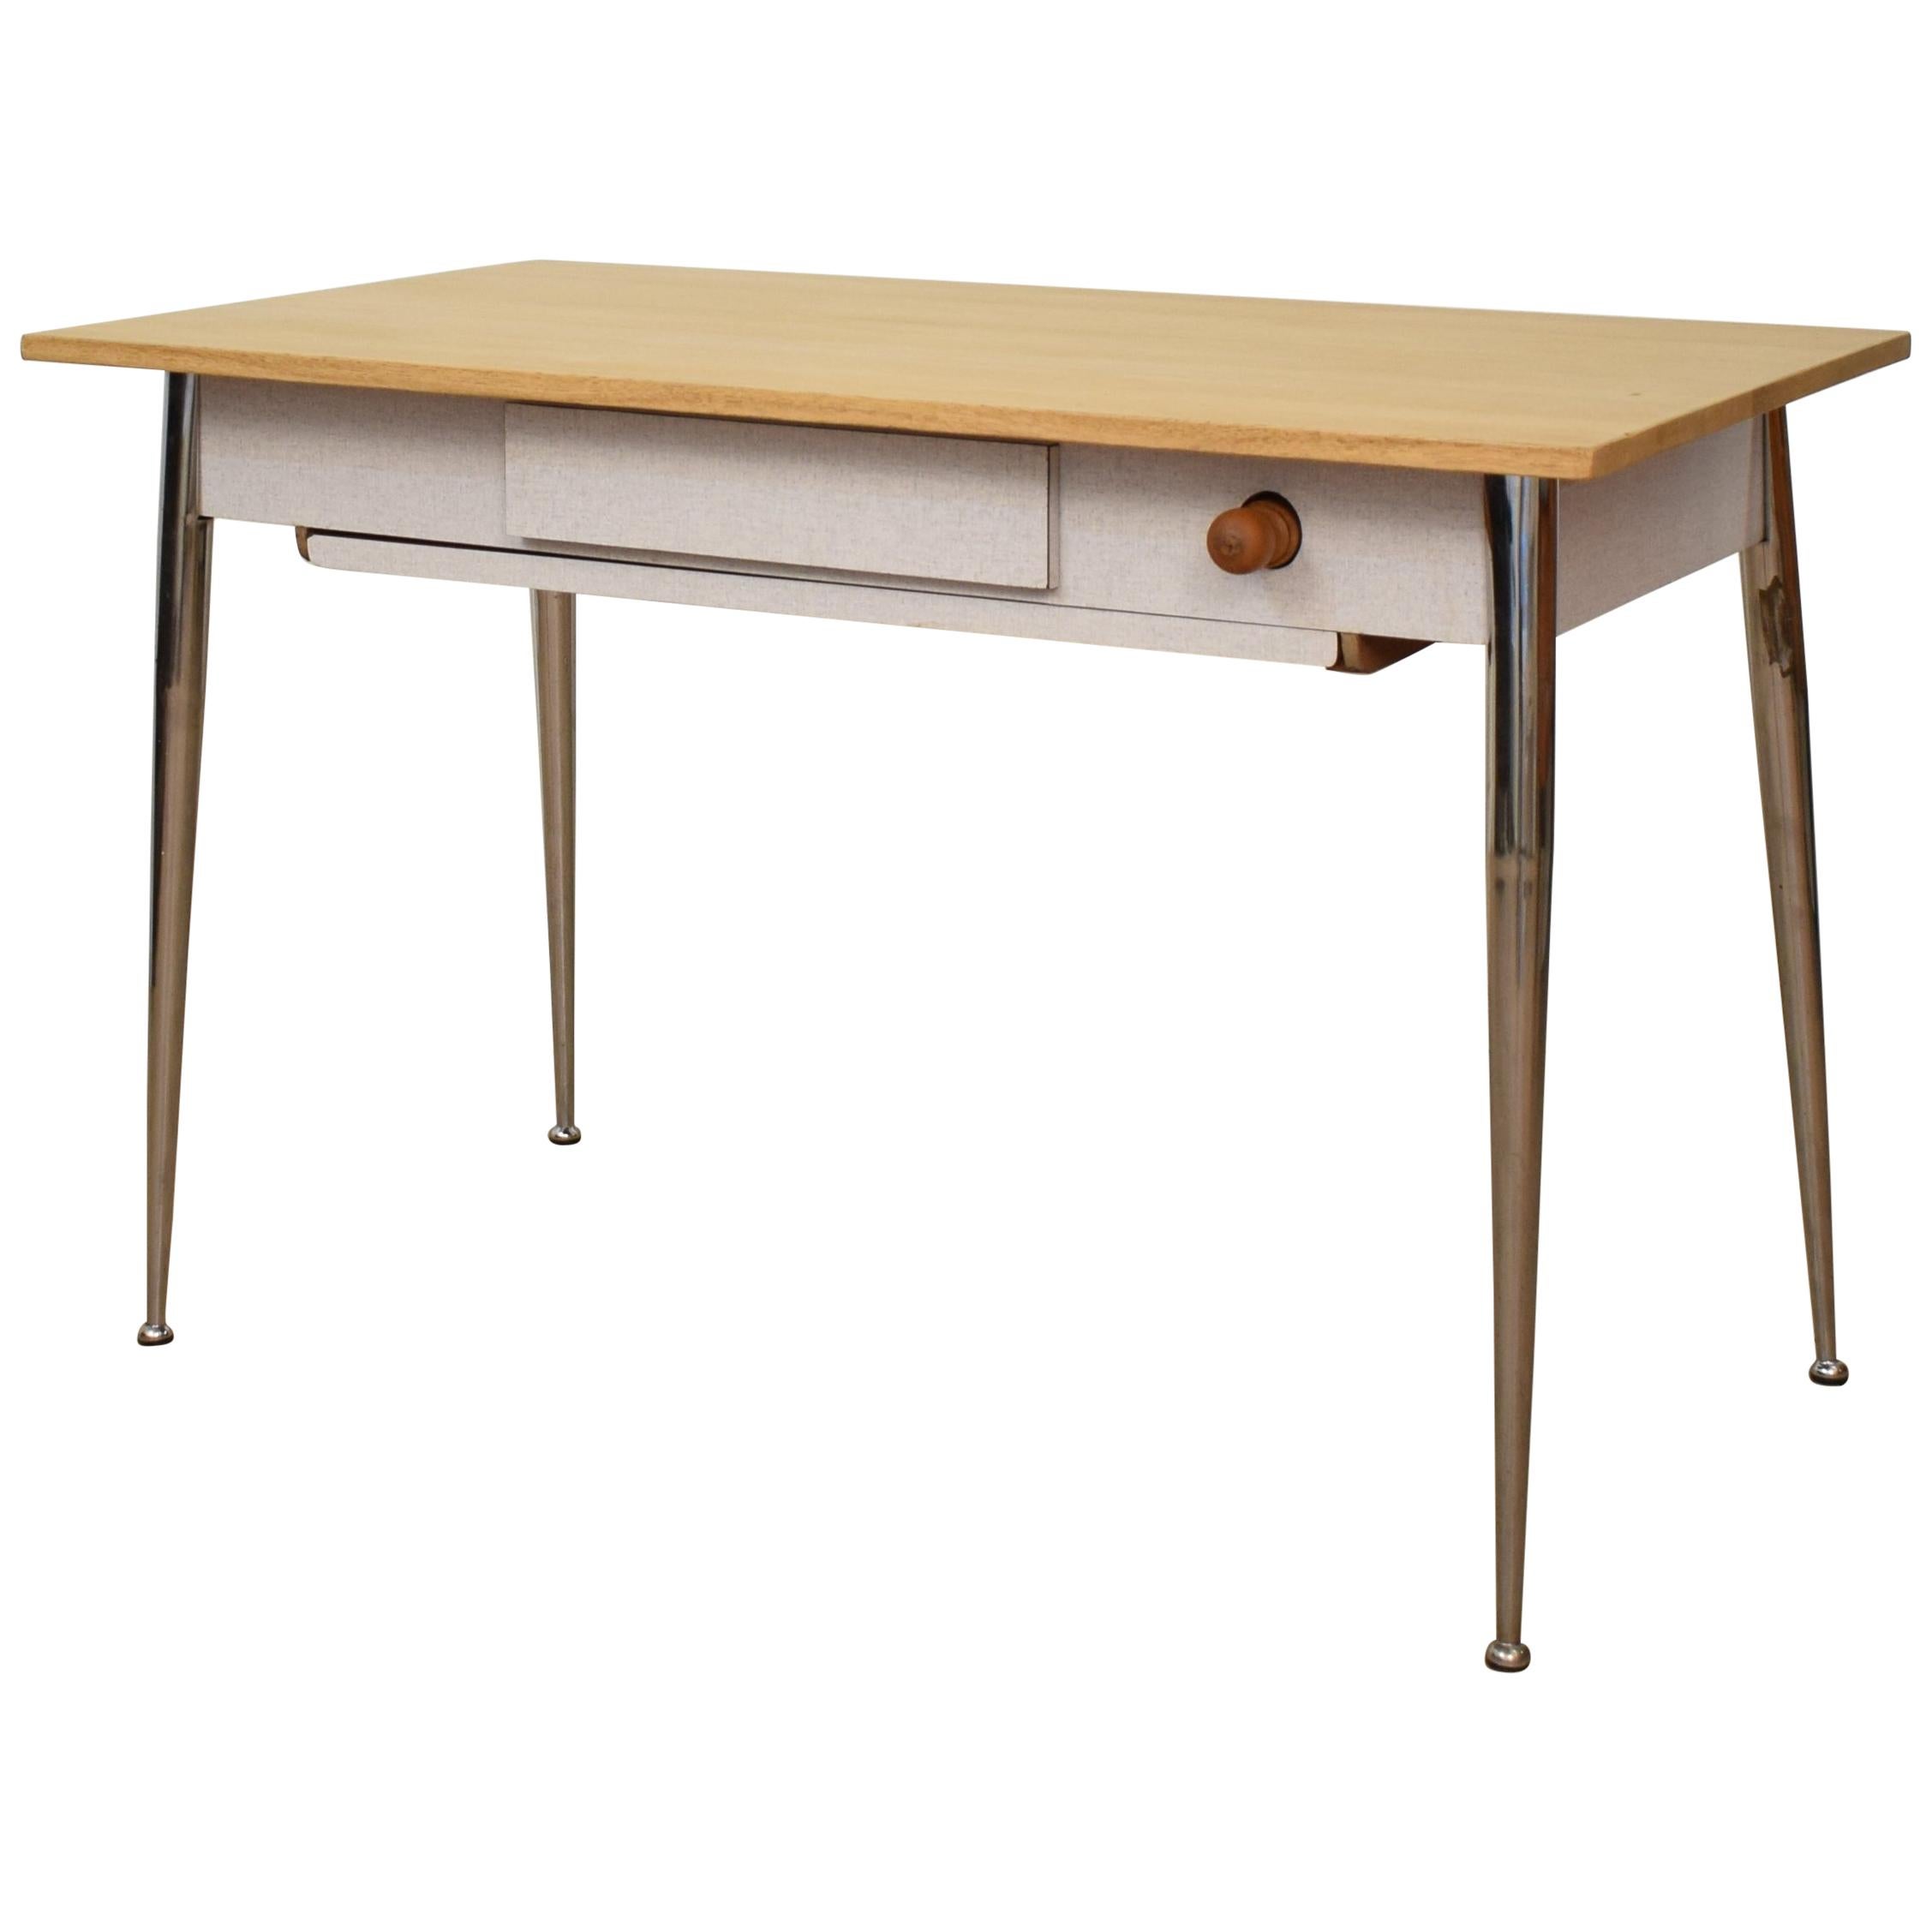 Midcentury Italian Formica Kitchen Pasta Table with Tapered Chrome Legs, 1950 For Sale